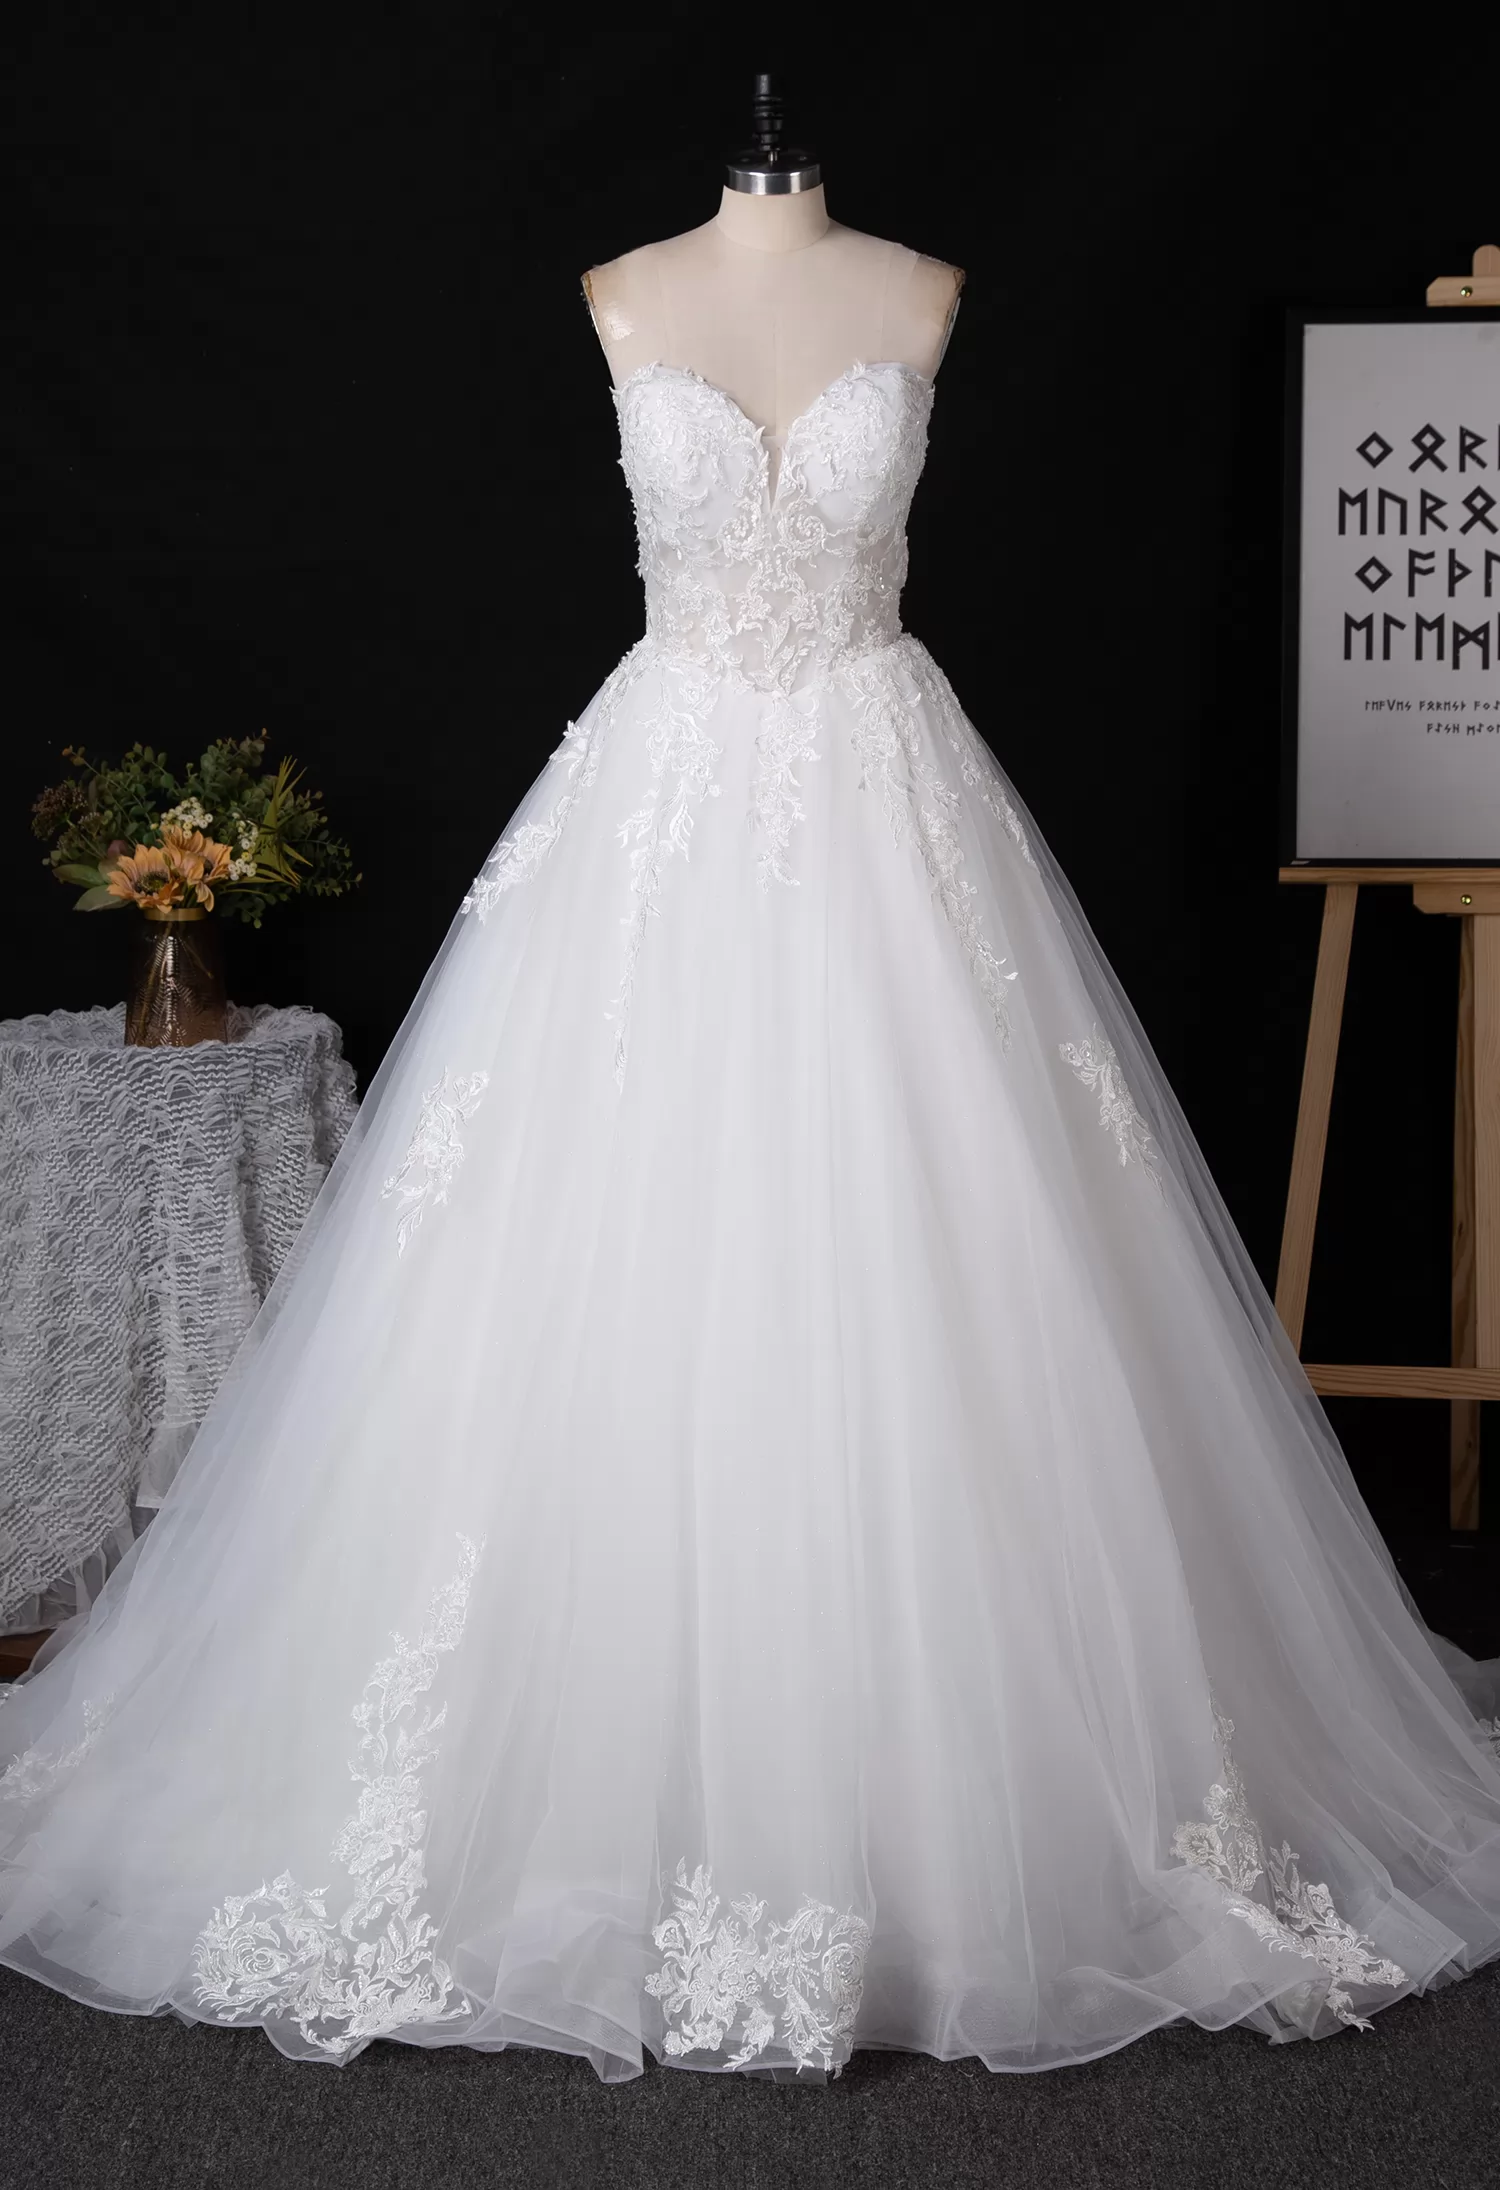 Strapless Sweetheart Wedding Dress With Illusion Back